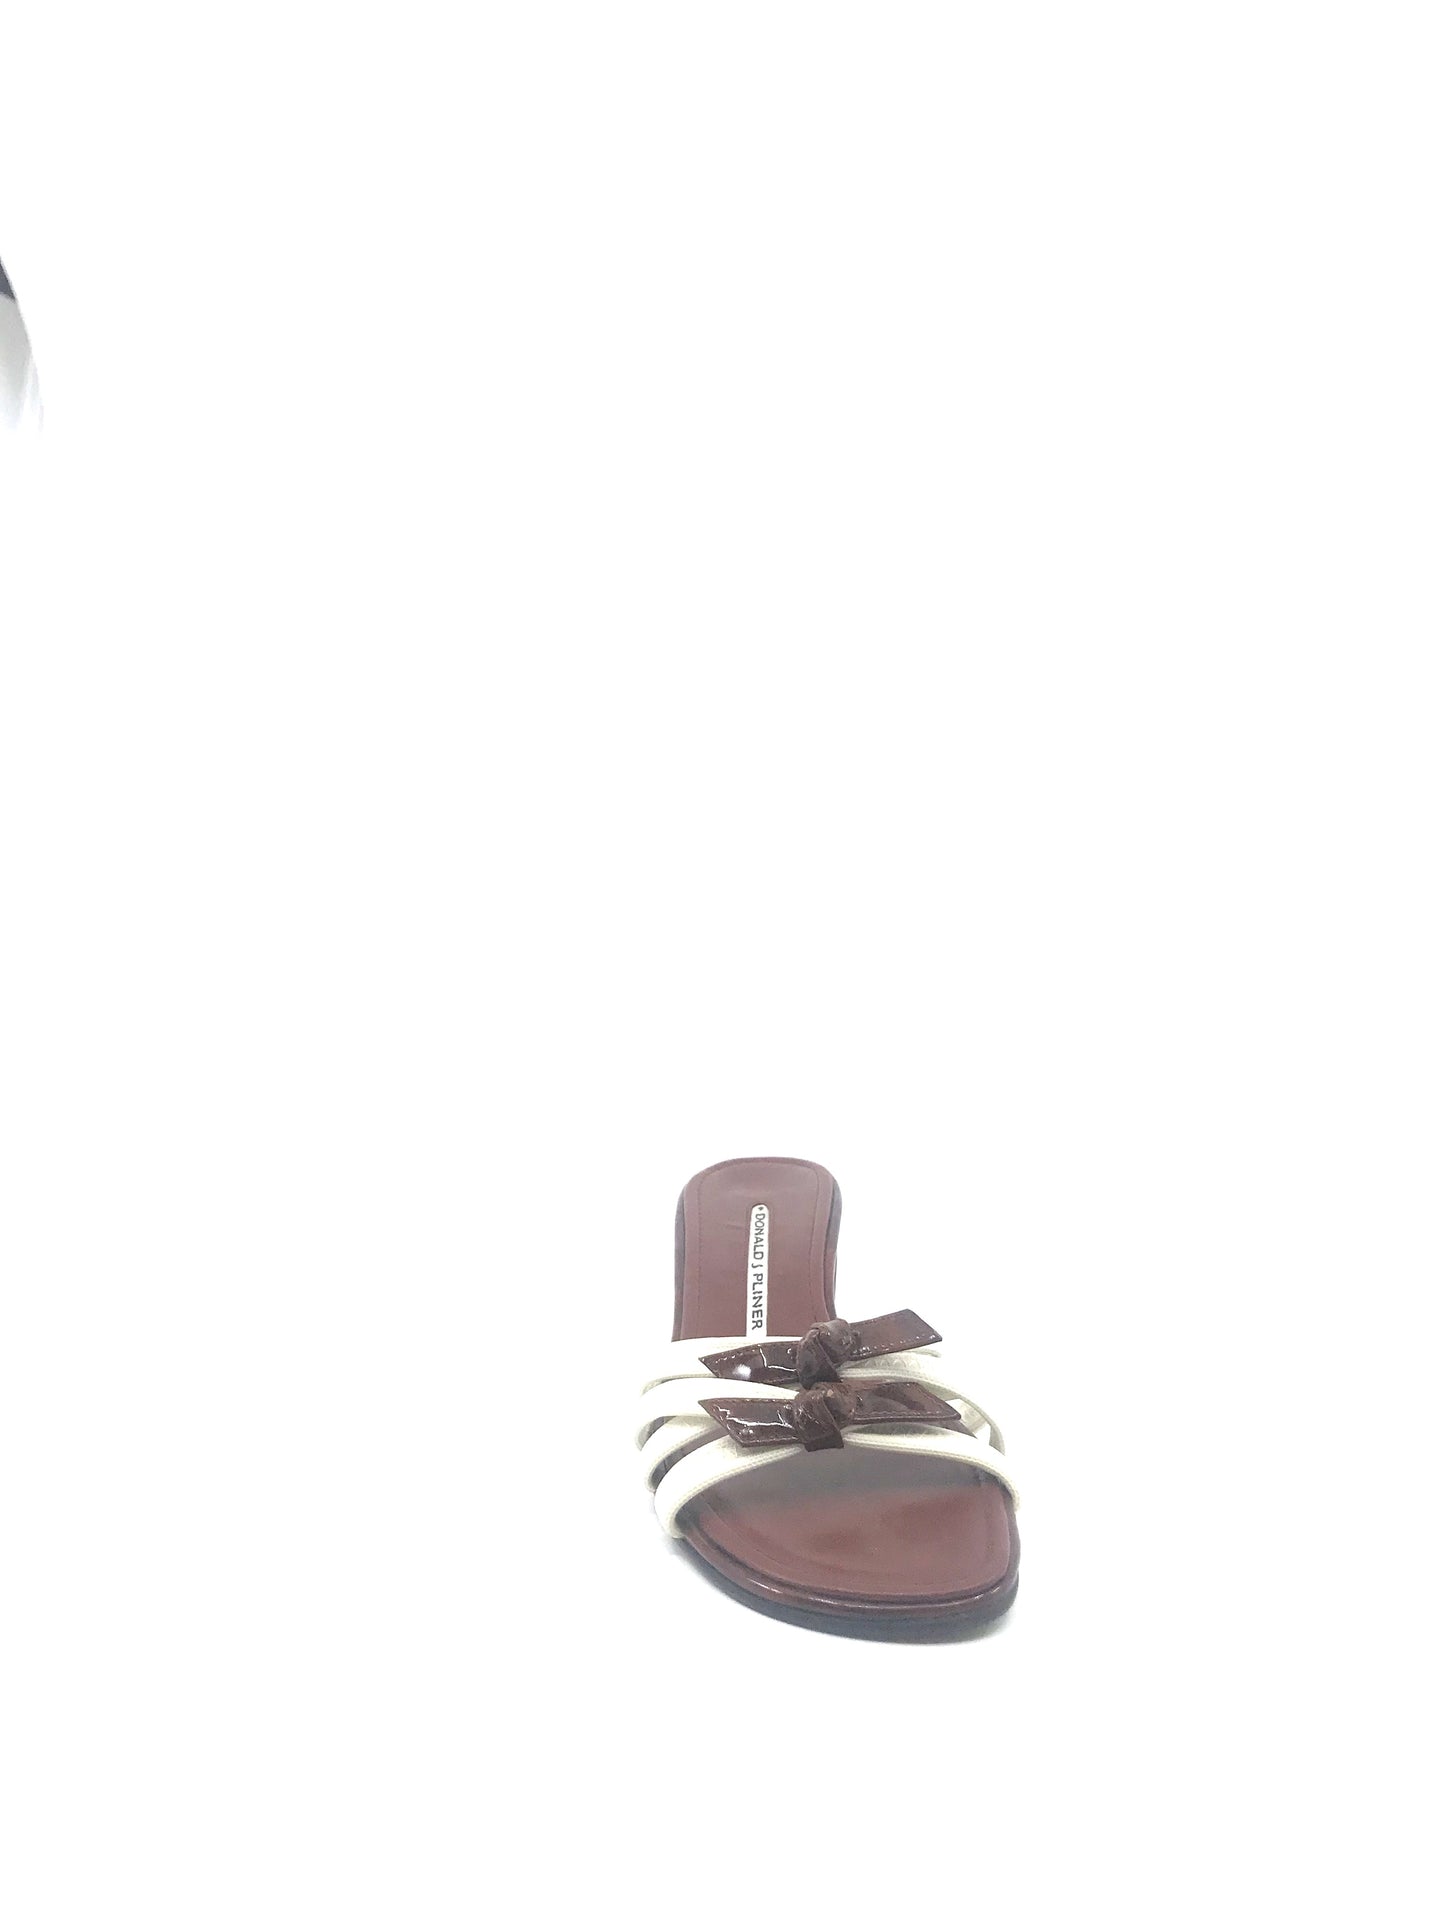 Hunt White Fabric and Brown Tortoise Patent Donald Pliner Sandal